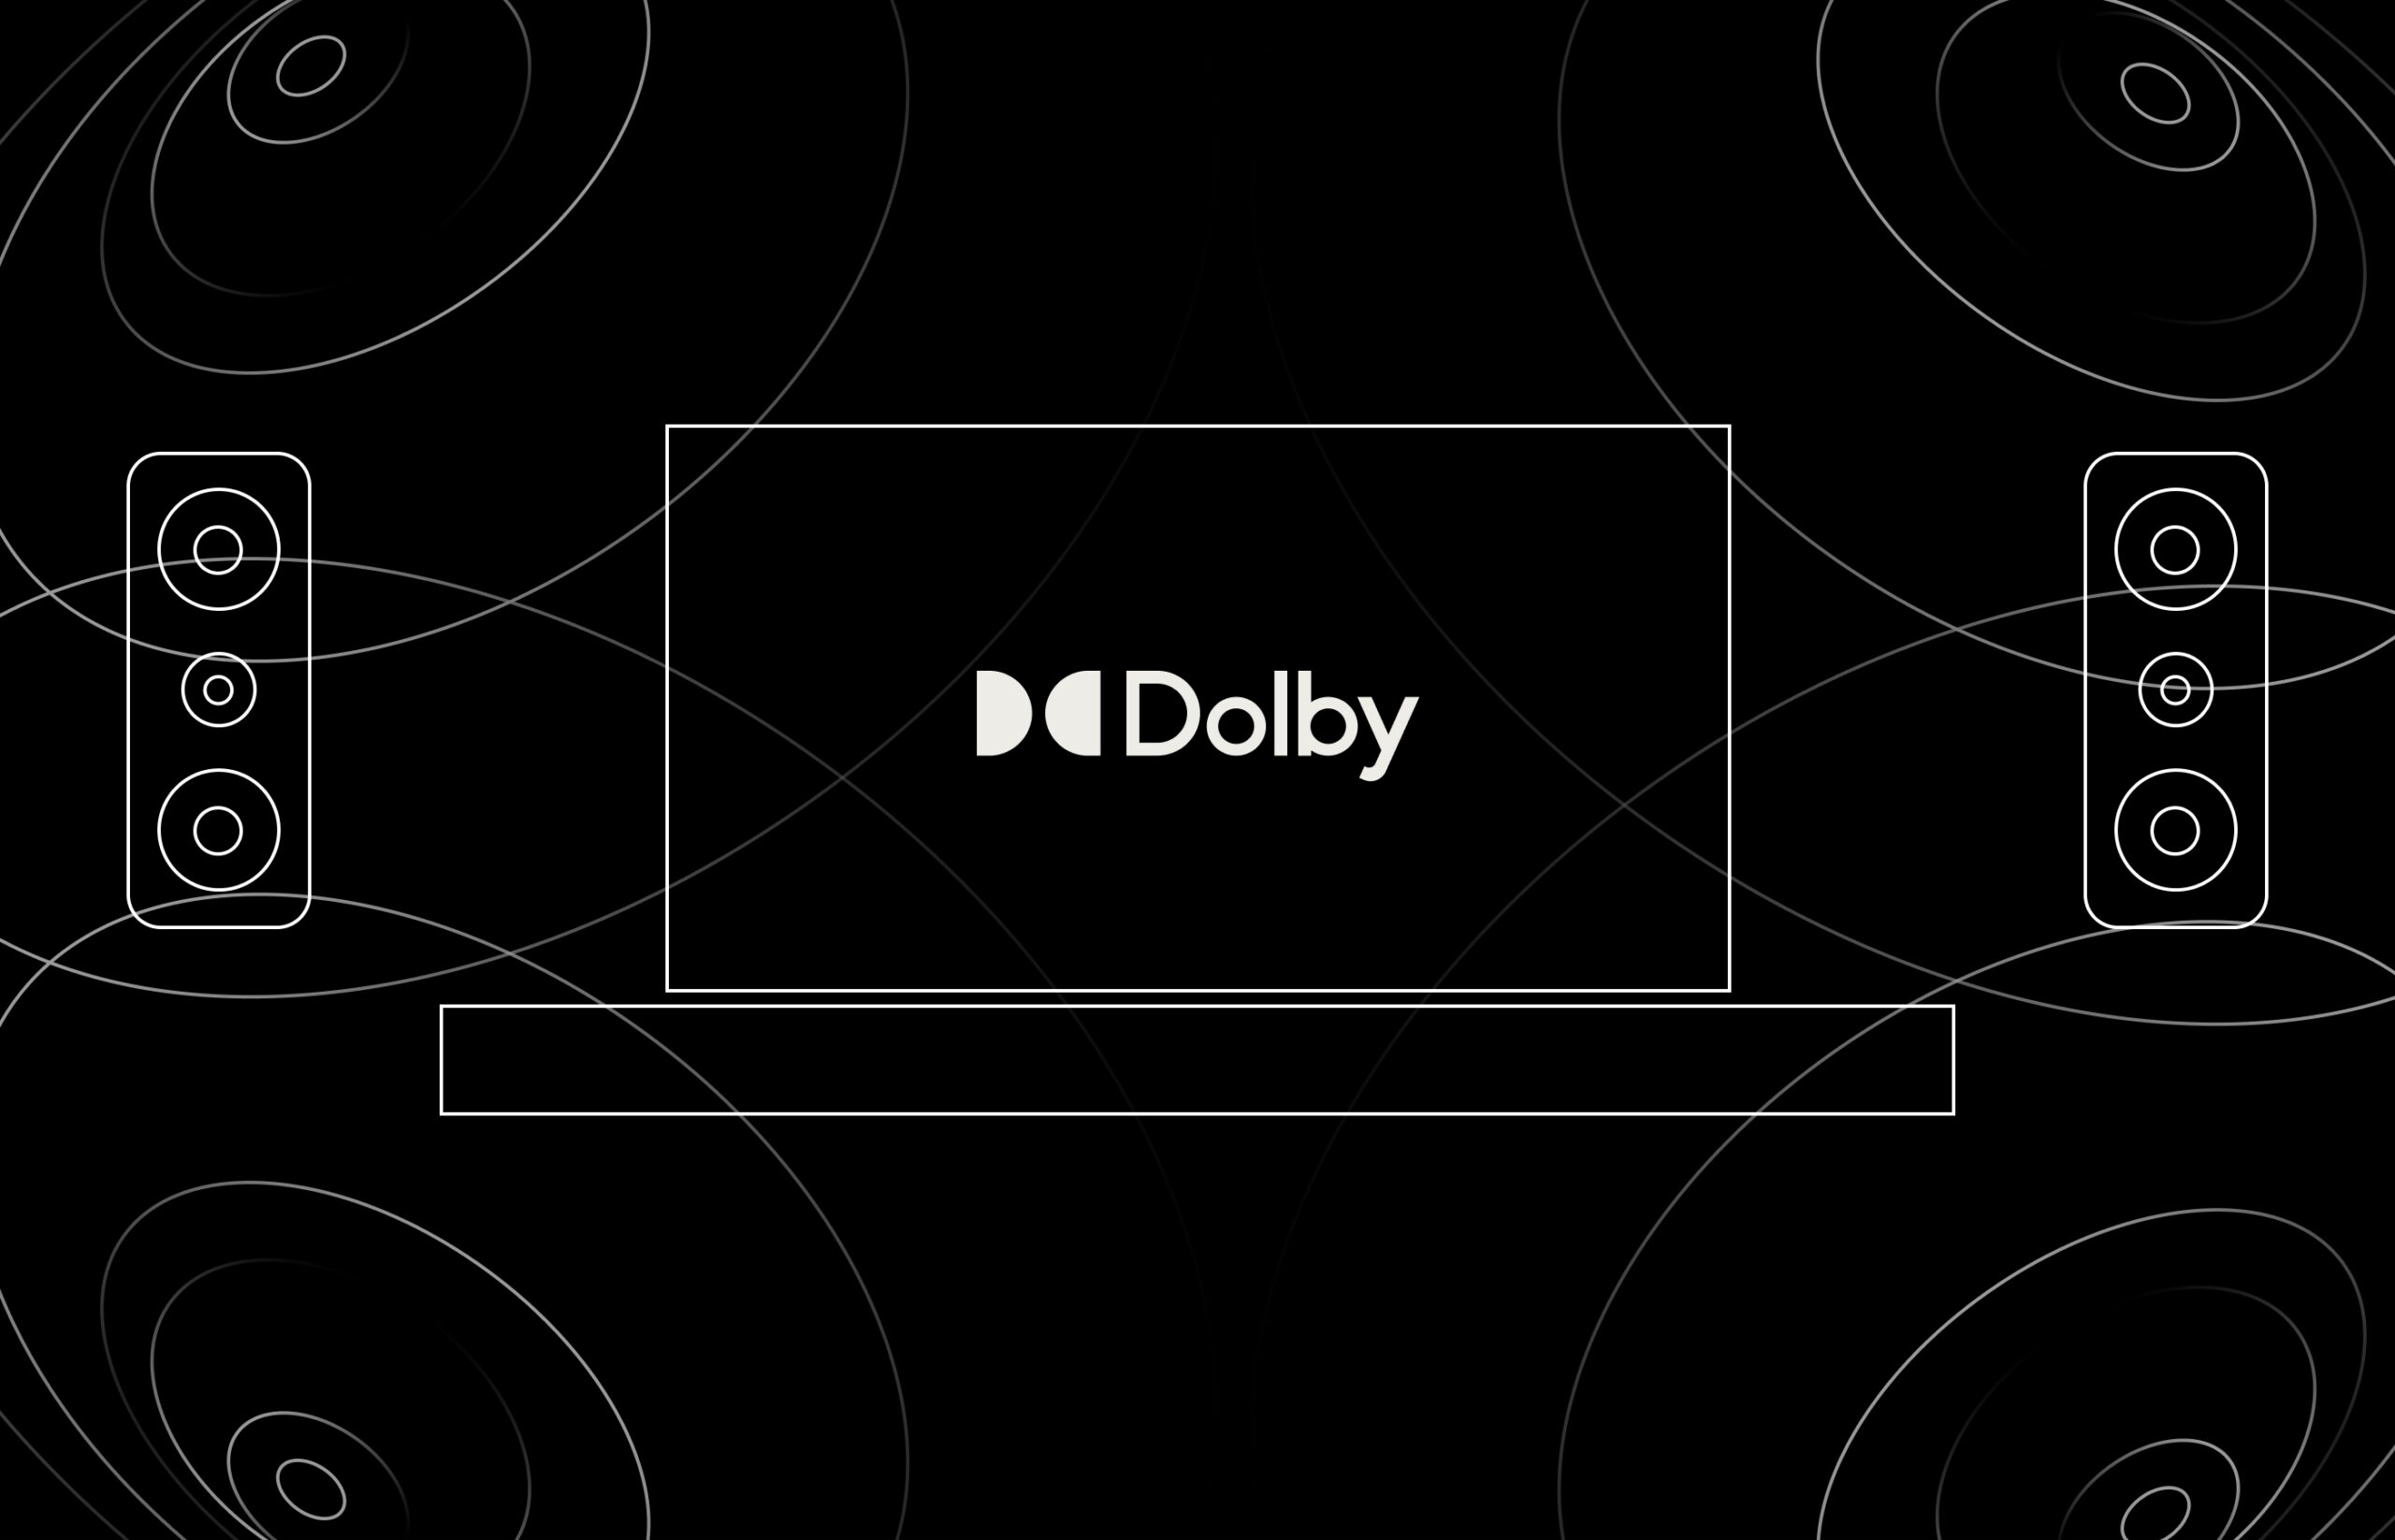 Dolby Atmos Disappointing Support for Inferior Products